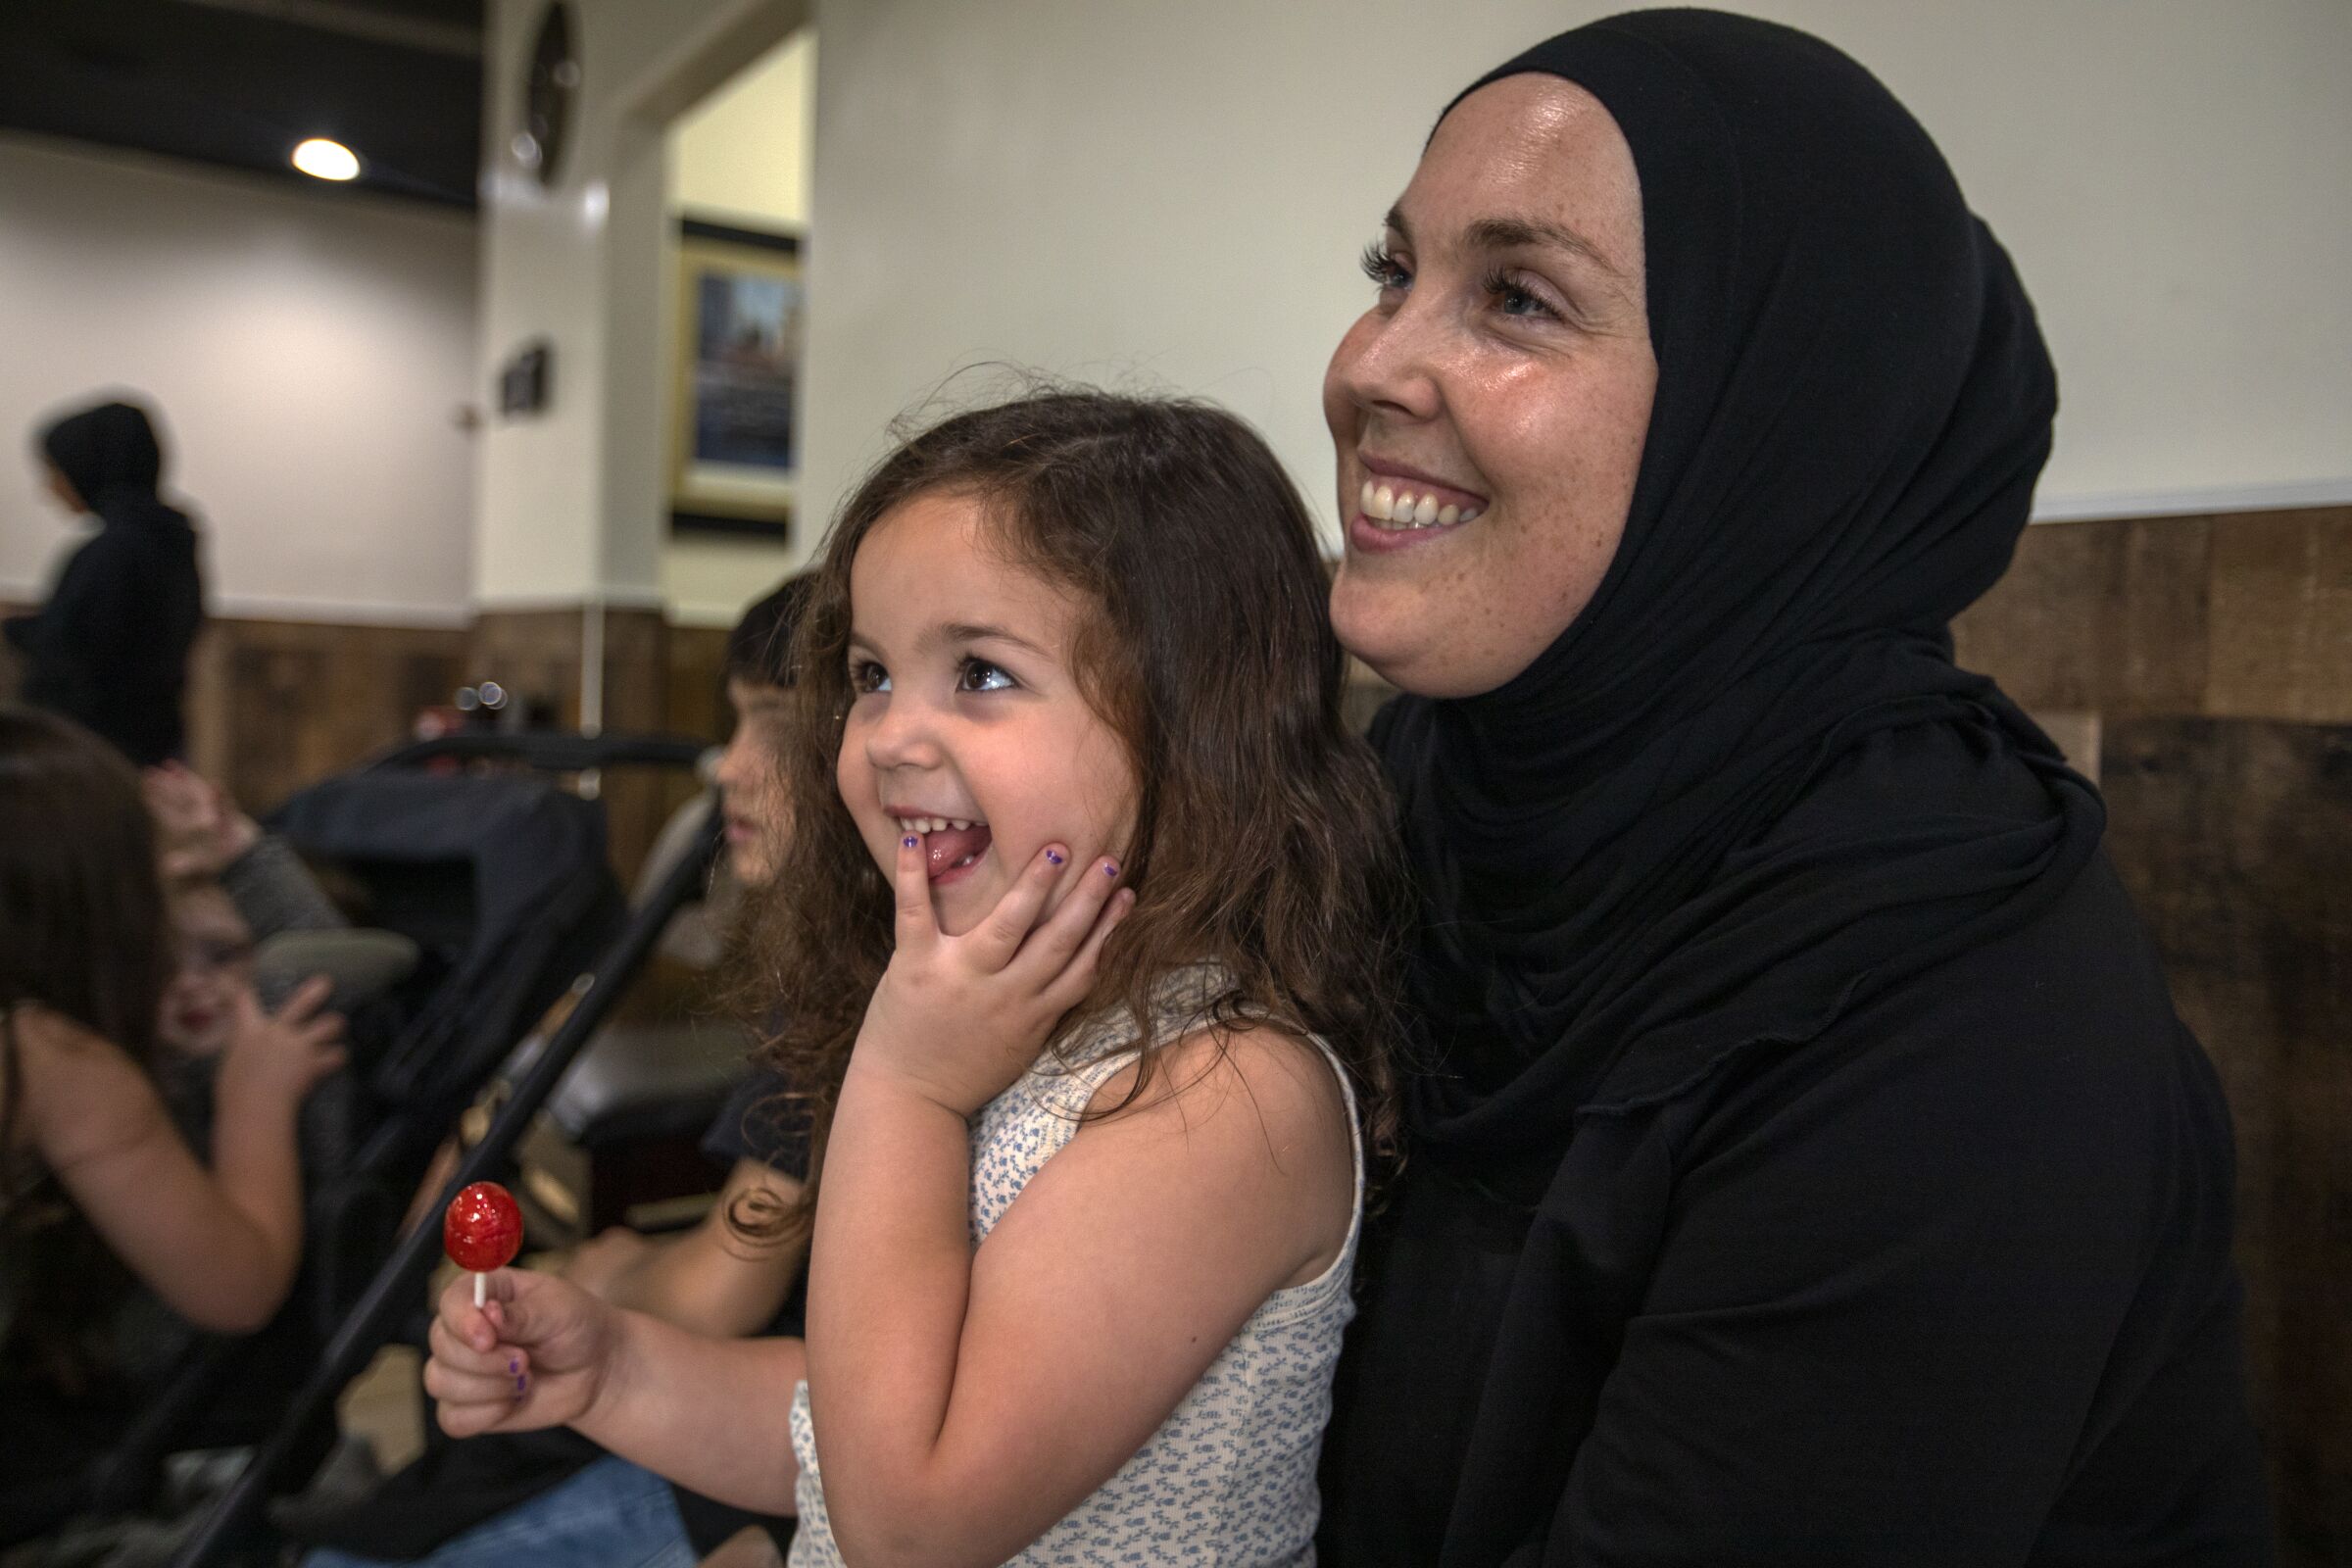 A hijab-wearing mother and 3-year-old daughter smiling.